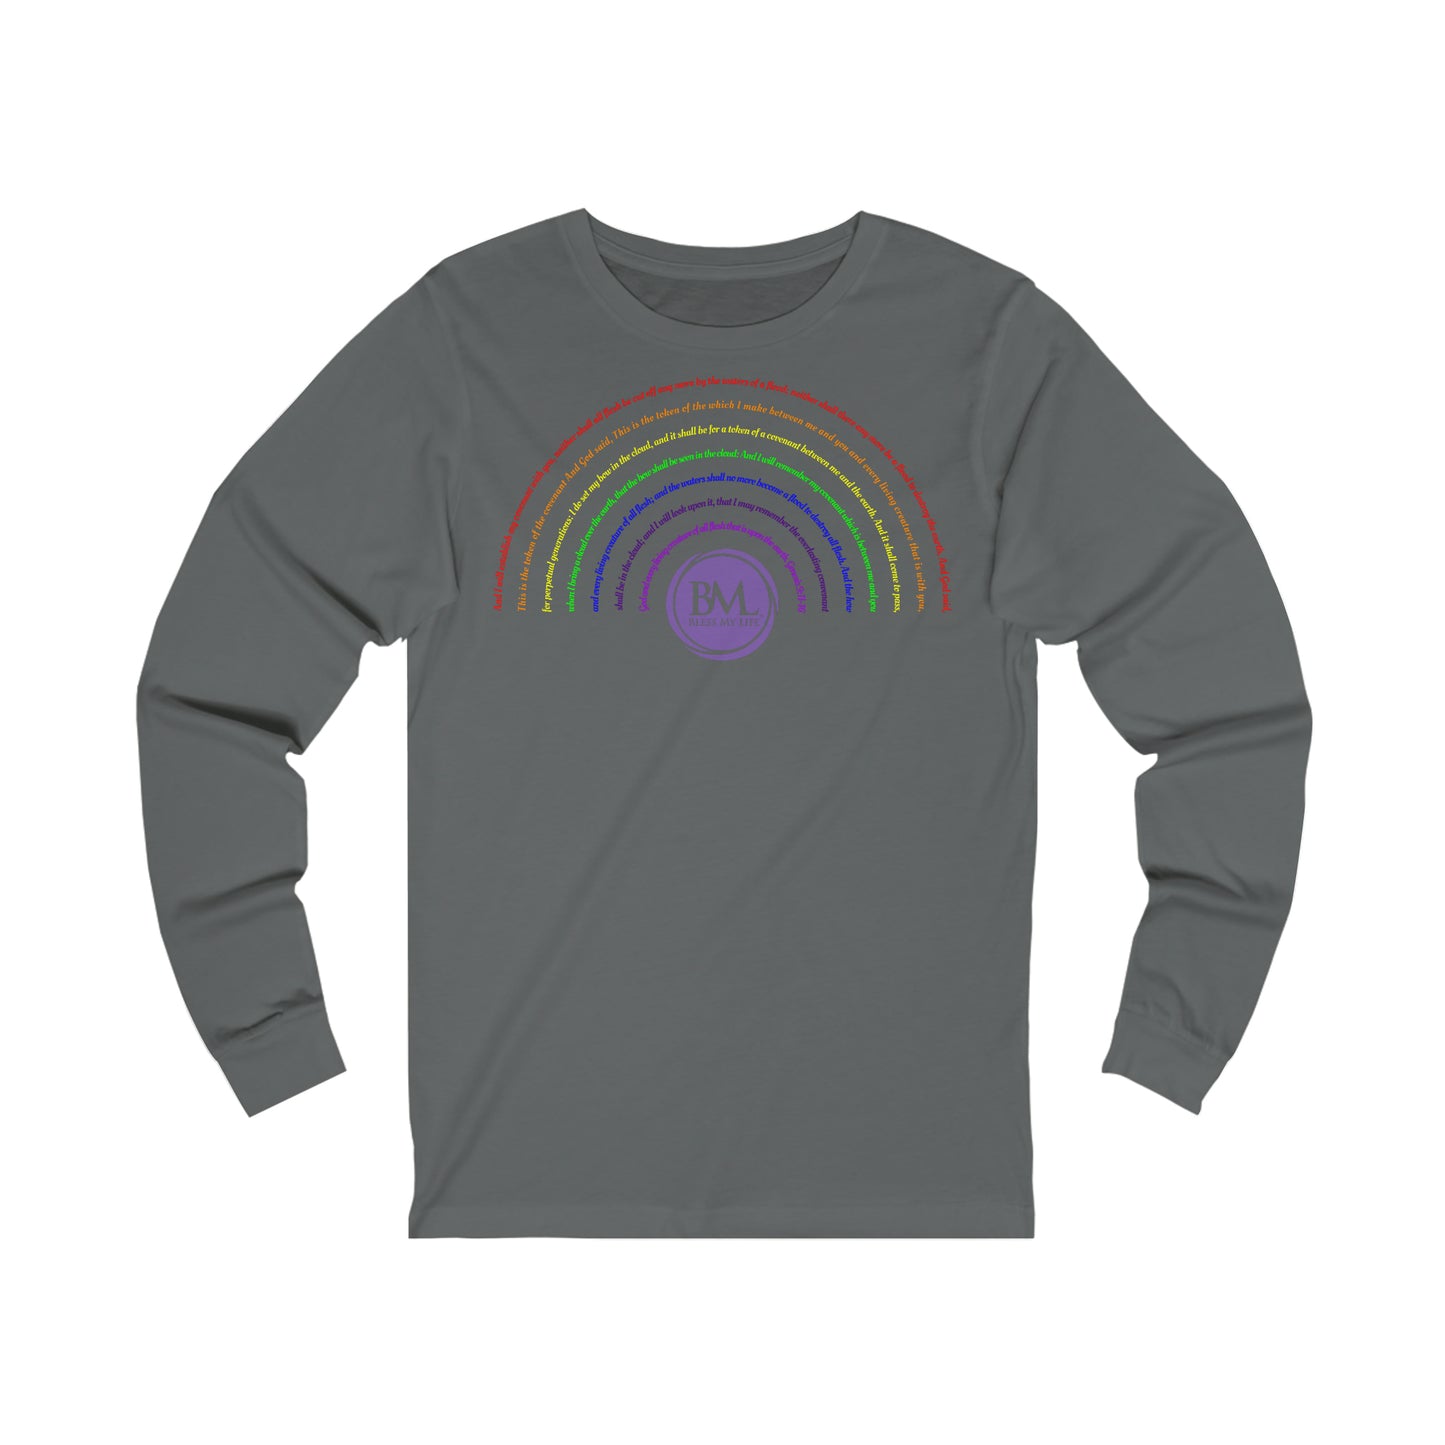 God's covenant in Biblical Scripture & in the form of His bow, the Rainbow. A Worldwide Favorite Covenant seeing in the sky by Billions! Unisex Jersey Long Sleeve Tee